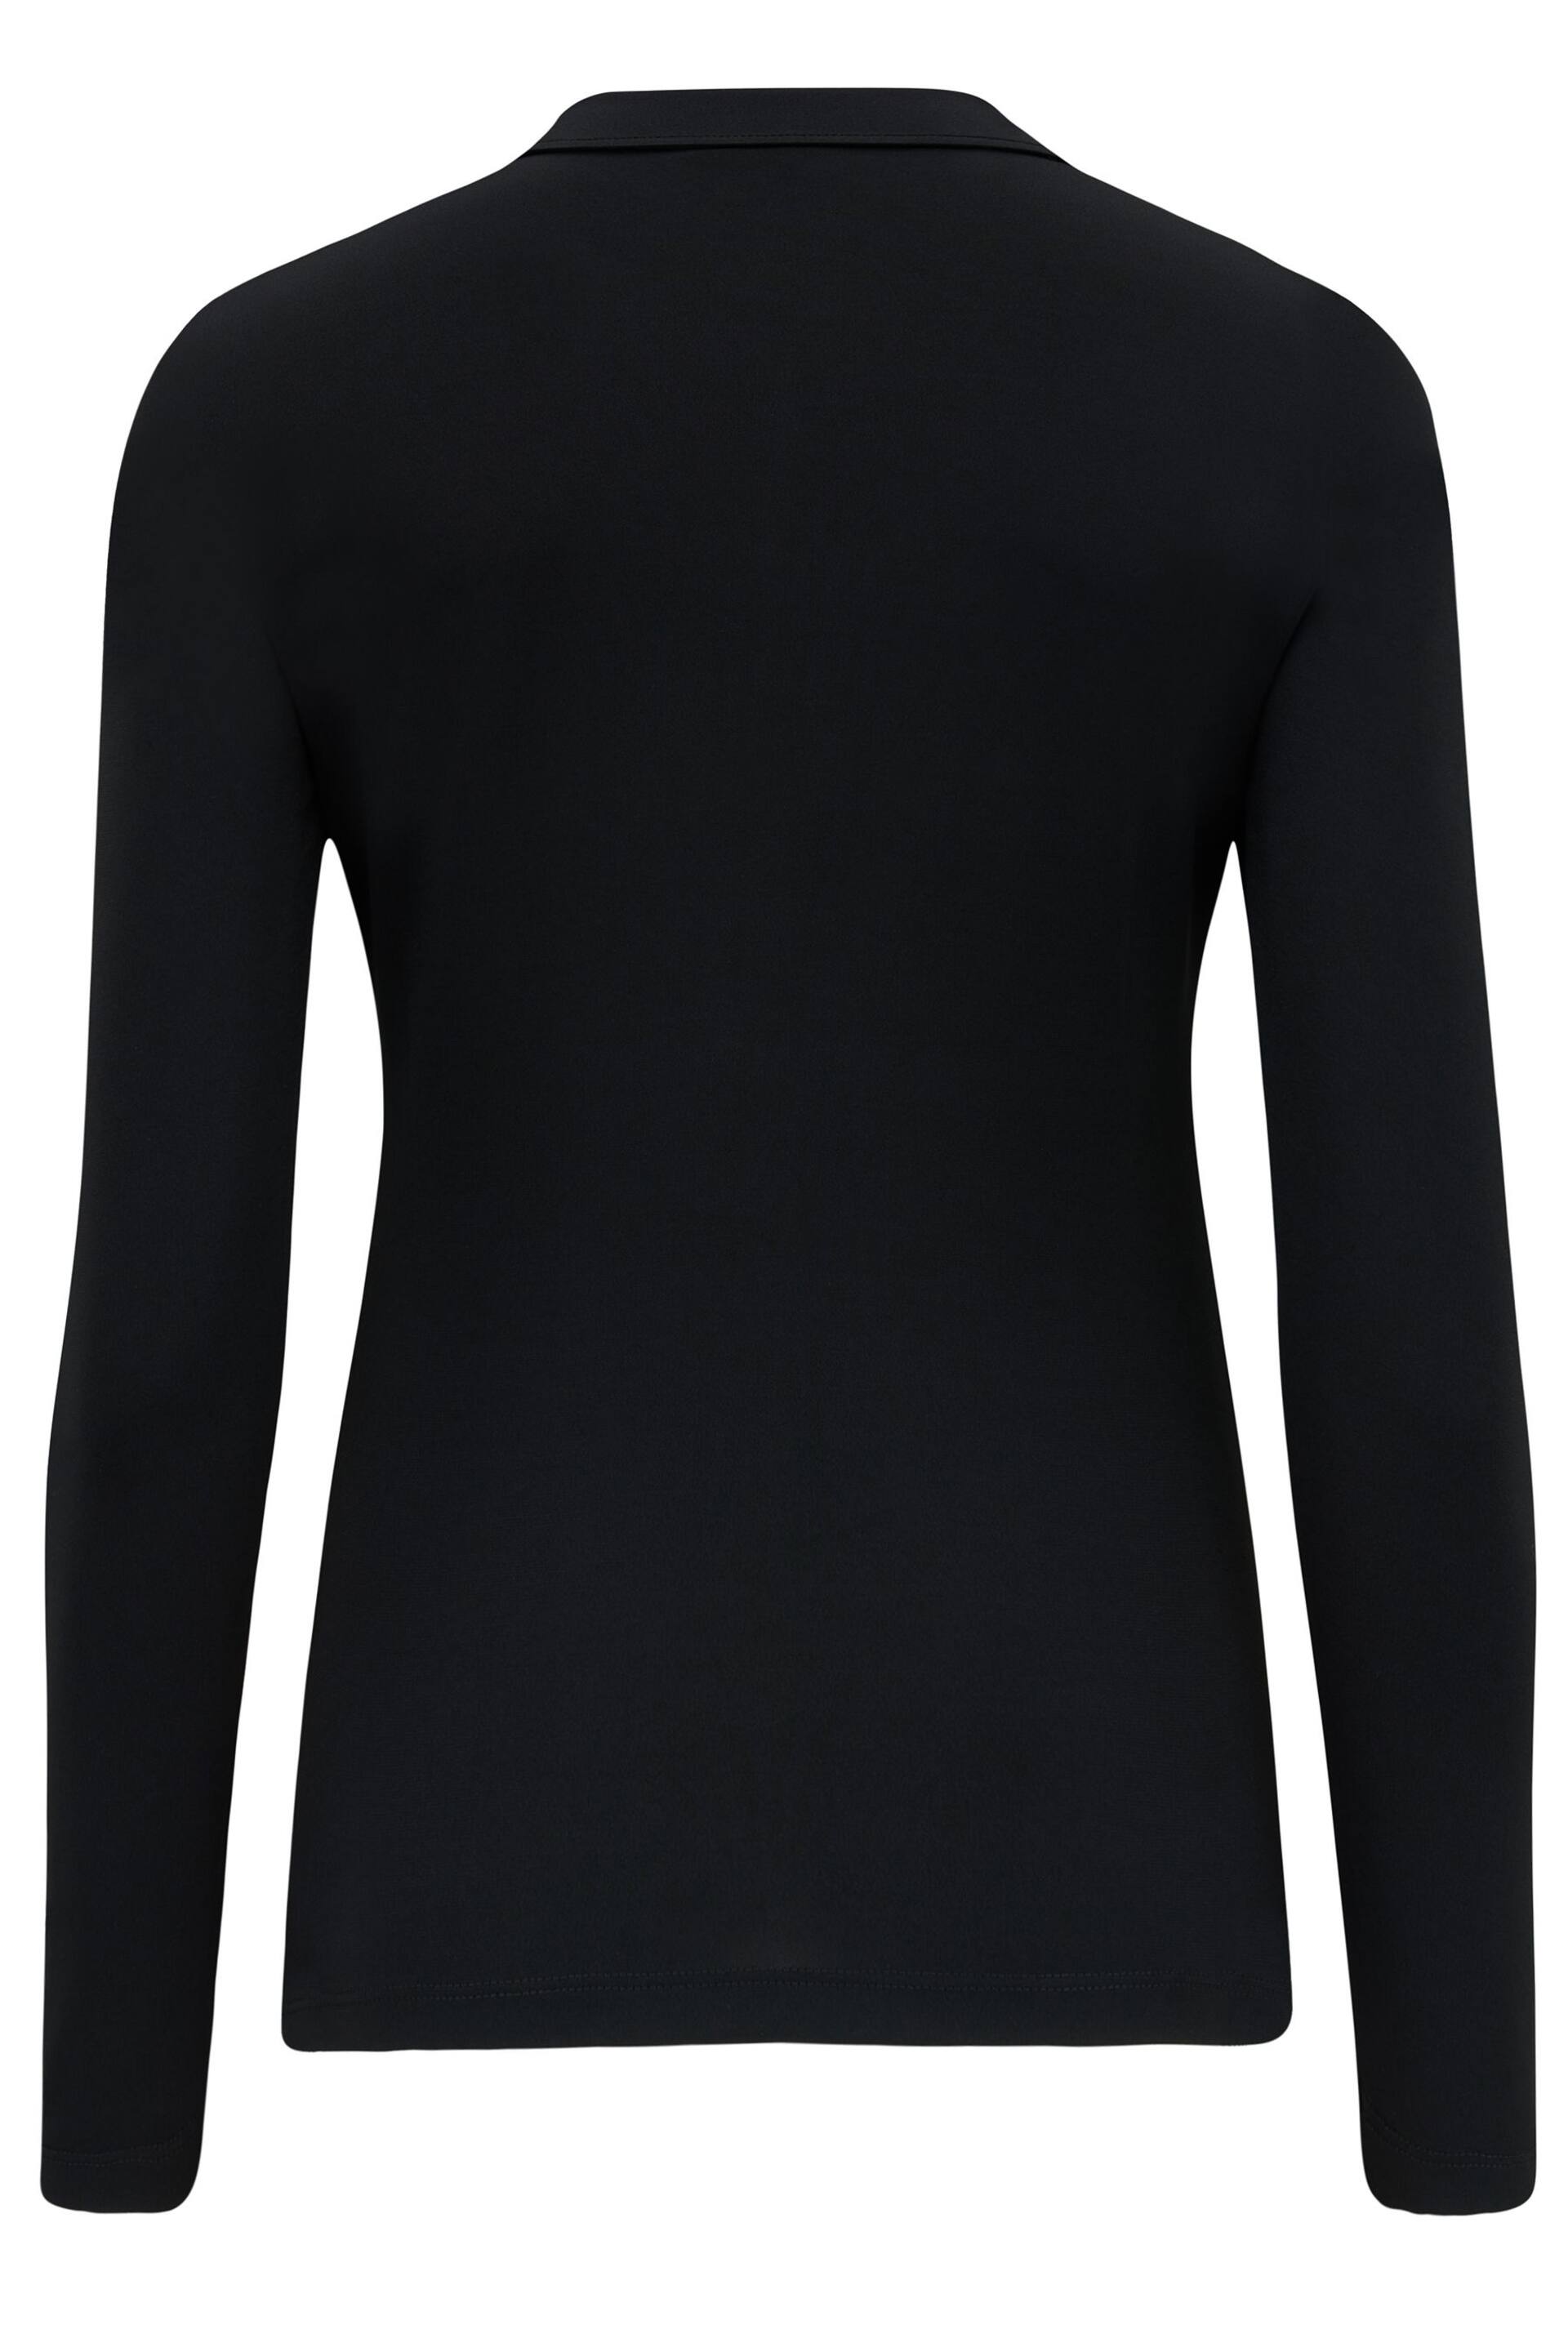 Pour Moi Black Bailey Slinky Recycled Jersey Shirt - Image 4 of 5